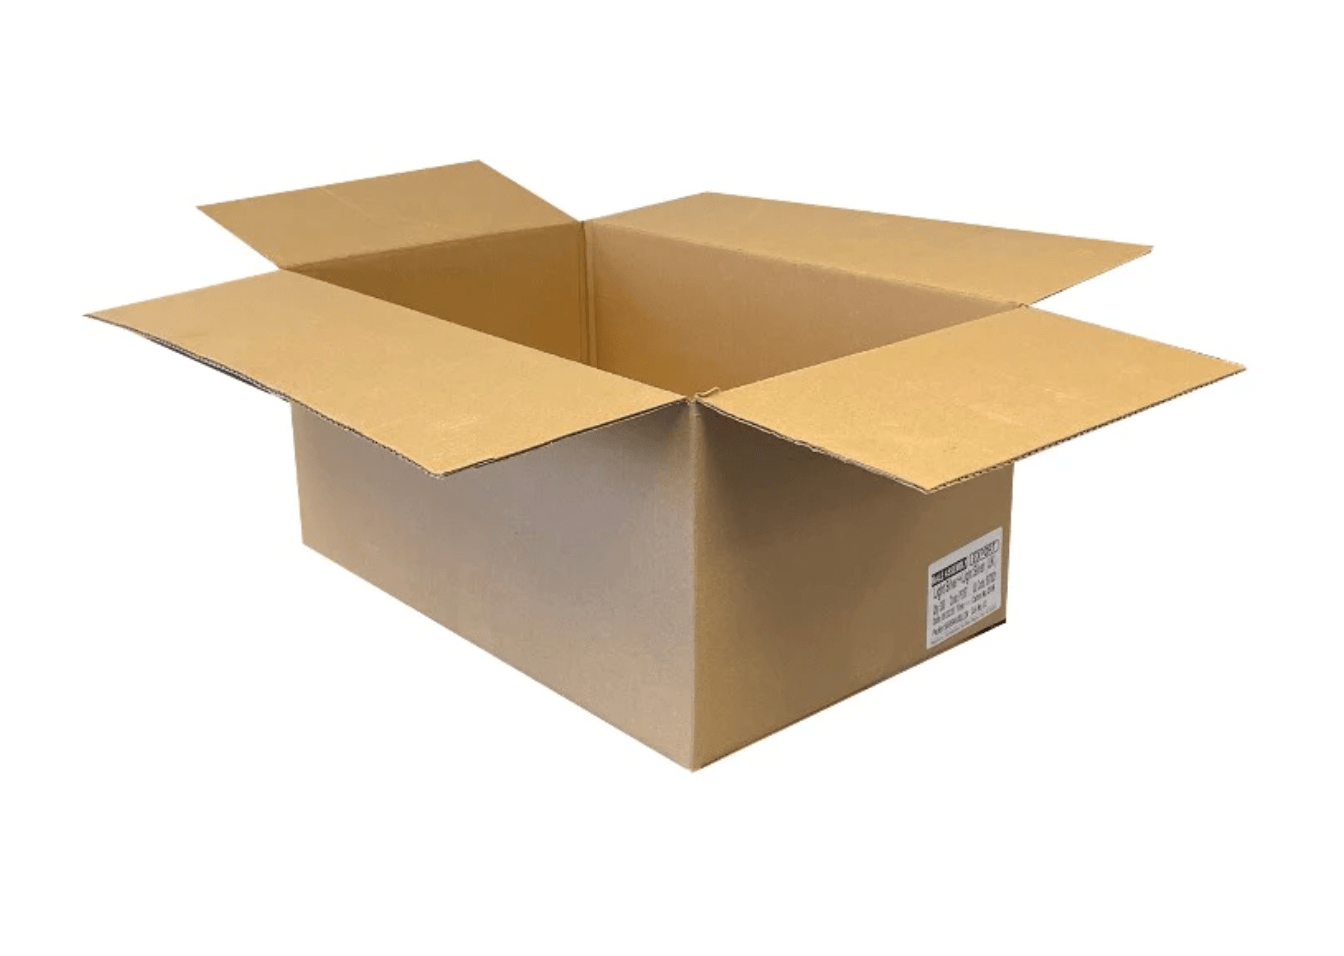 400 x Used Plain Strong Single Wall Box - 580 x 370 x 275mm - High Quality Recycled Once-Used Cardboard Boxes online - Black Country Boxes